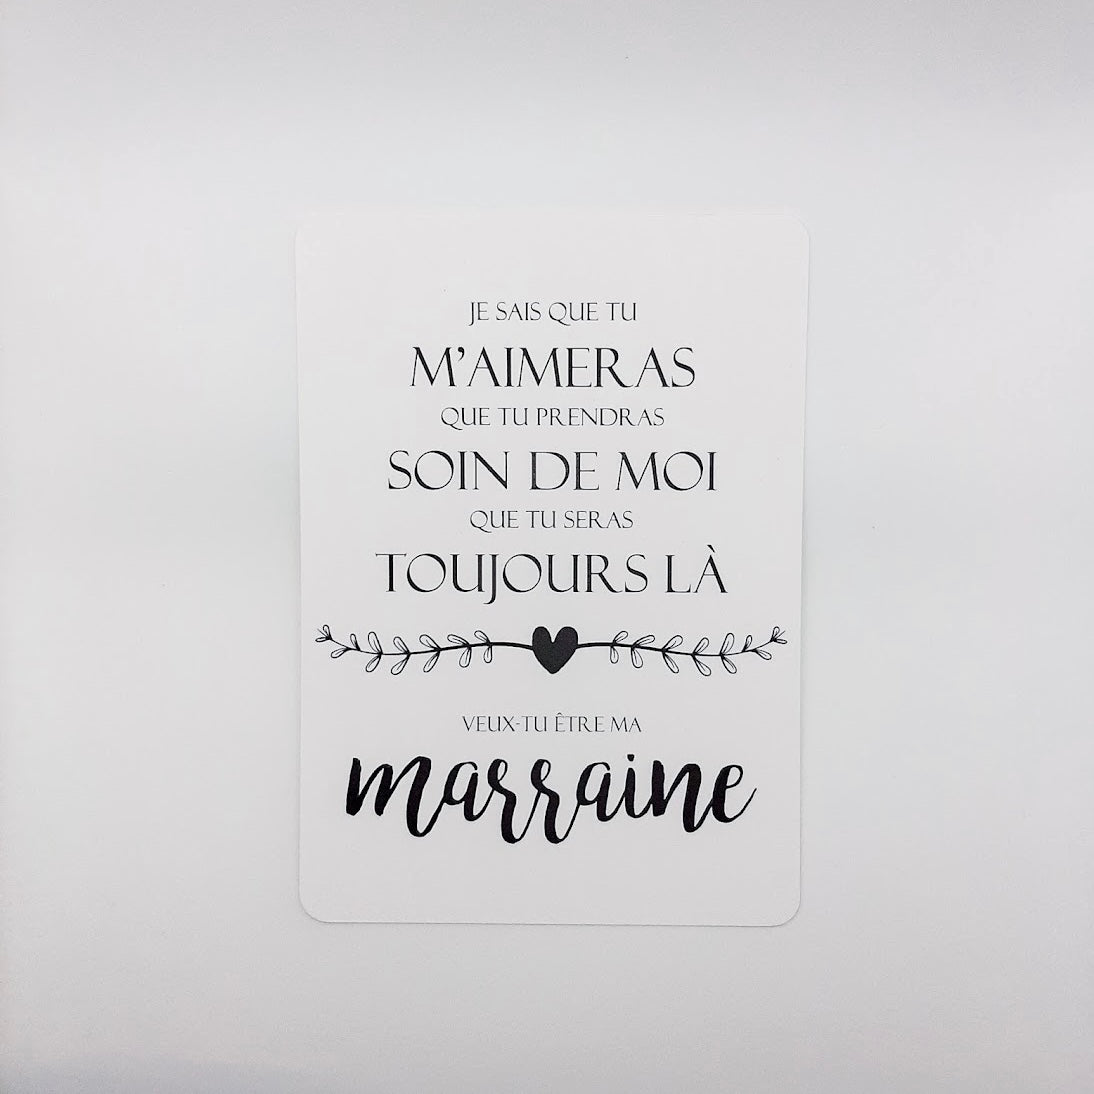 "Godmother" Announcement Card, Petits Moments Qc